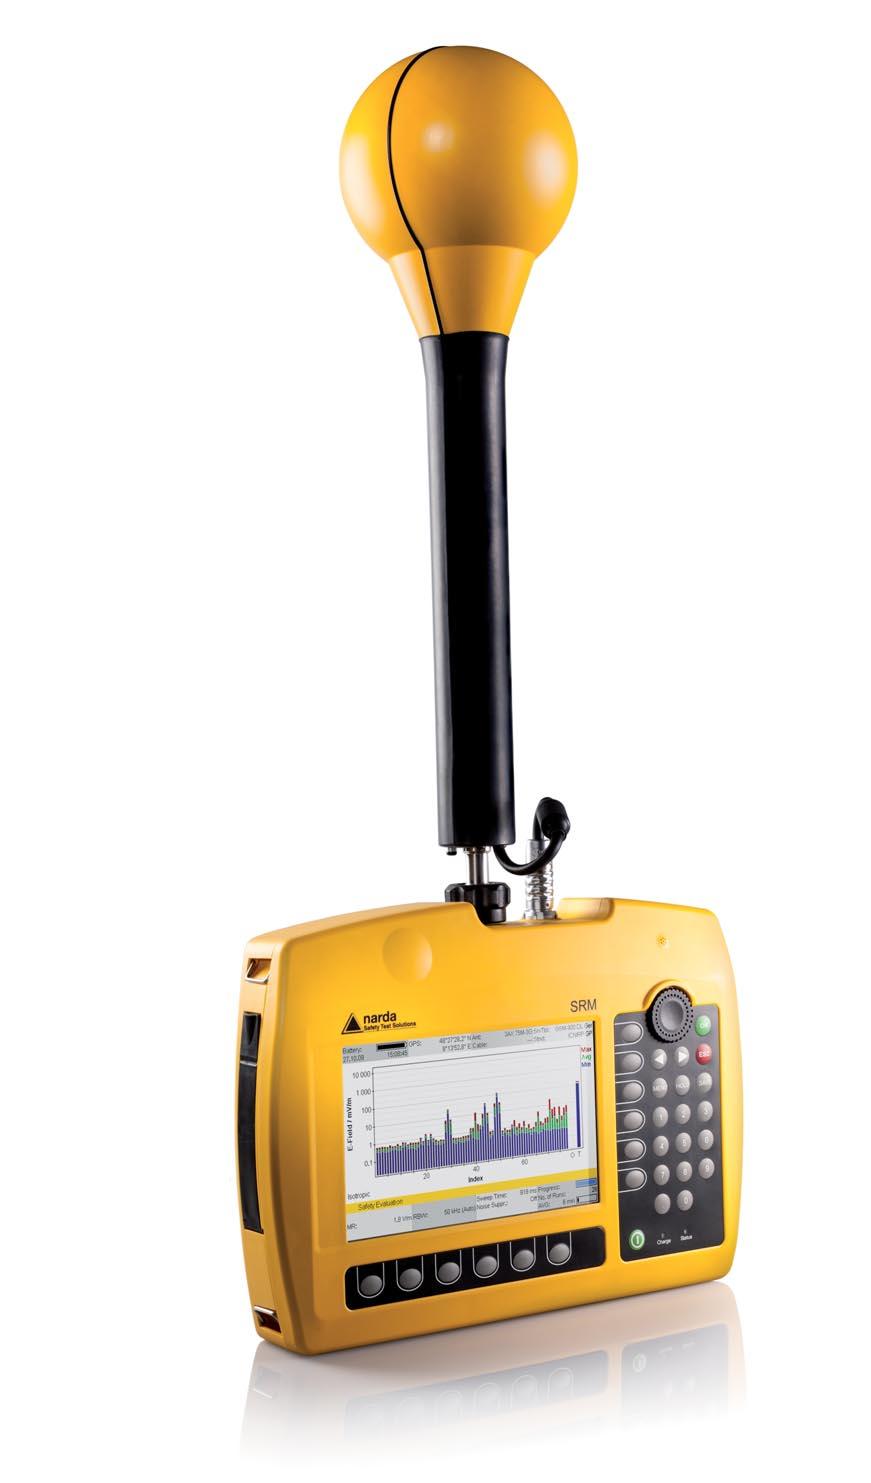 Selective measuring devices such as spectrum analyzers break down the fields into their individual frequency components, allowing detailed analysis.